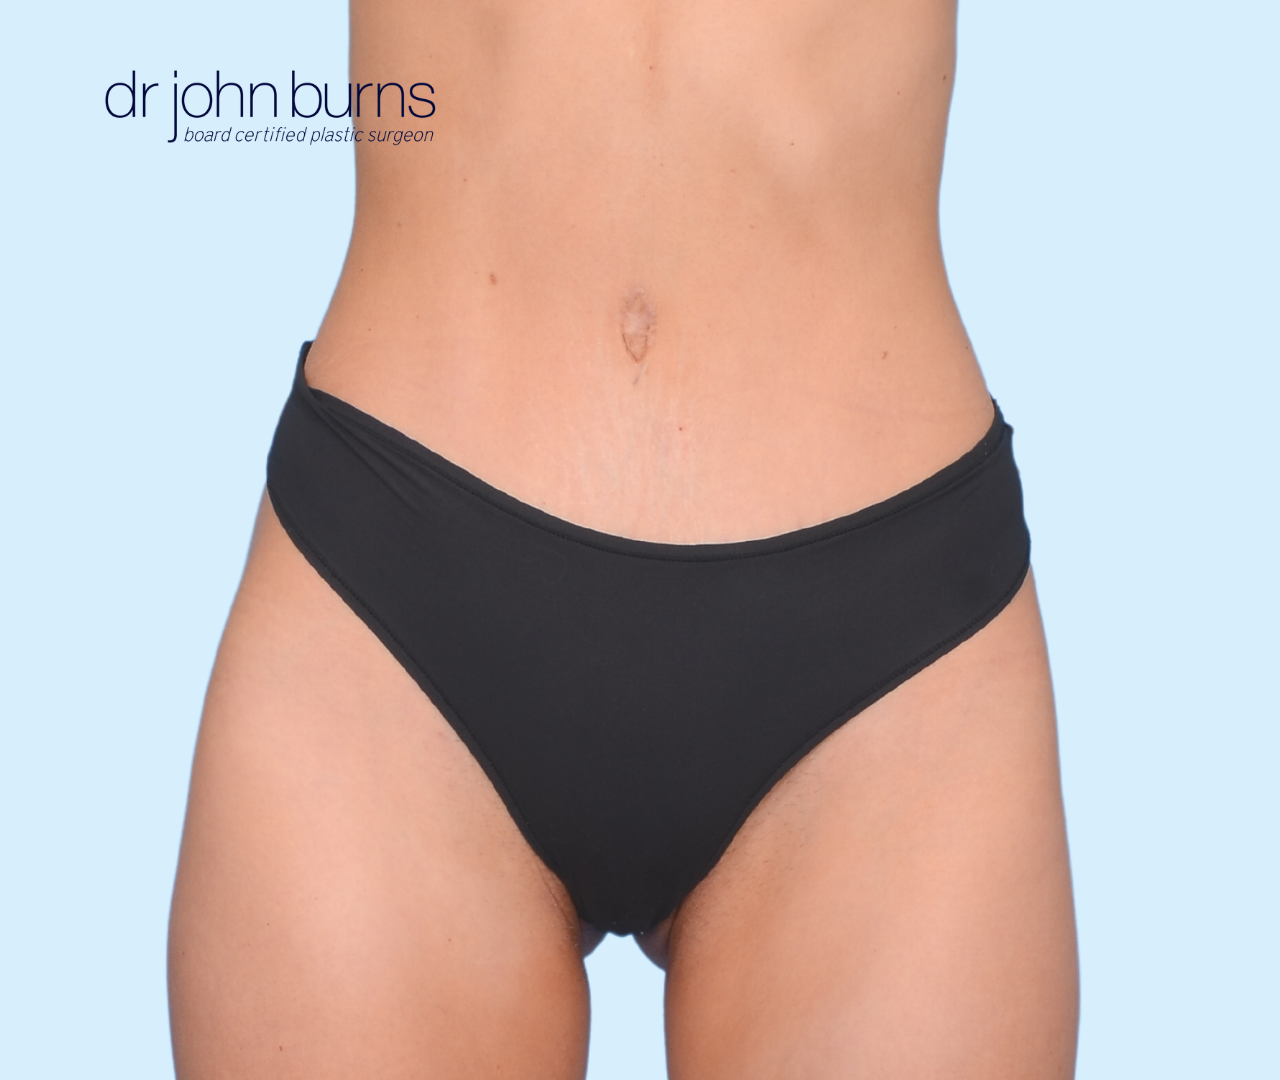 Skinnies Instant Bikini Tuck is tucks & flattens tummy & is WATERPROOF. Get  a Tight Looking Tummy While Showing Mid-Section - Shark Tank Product!